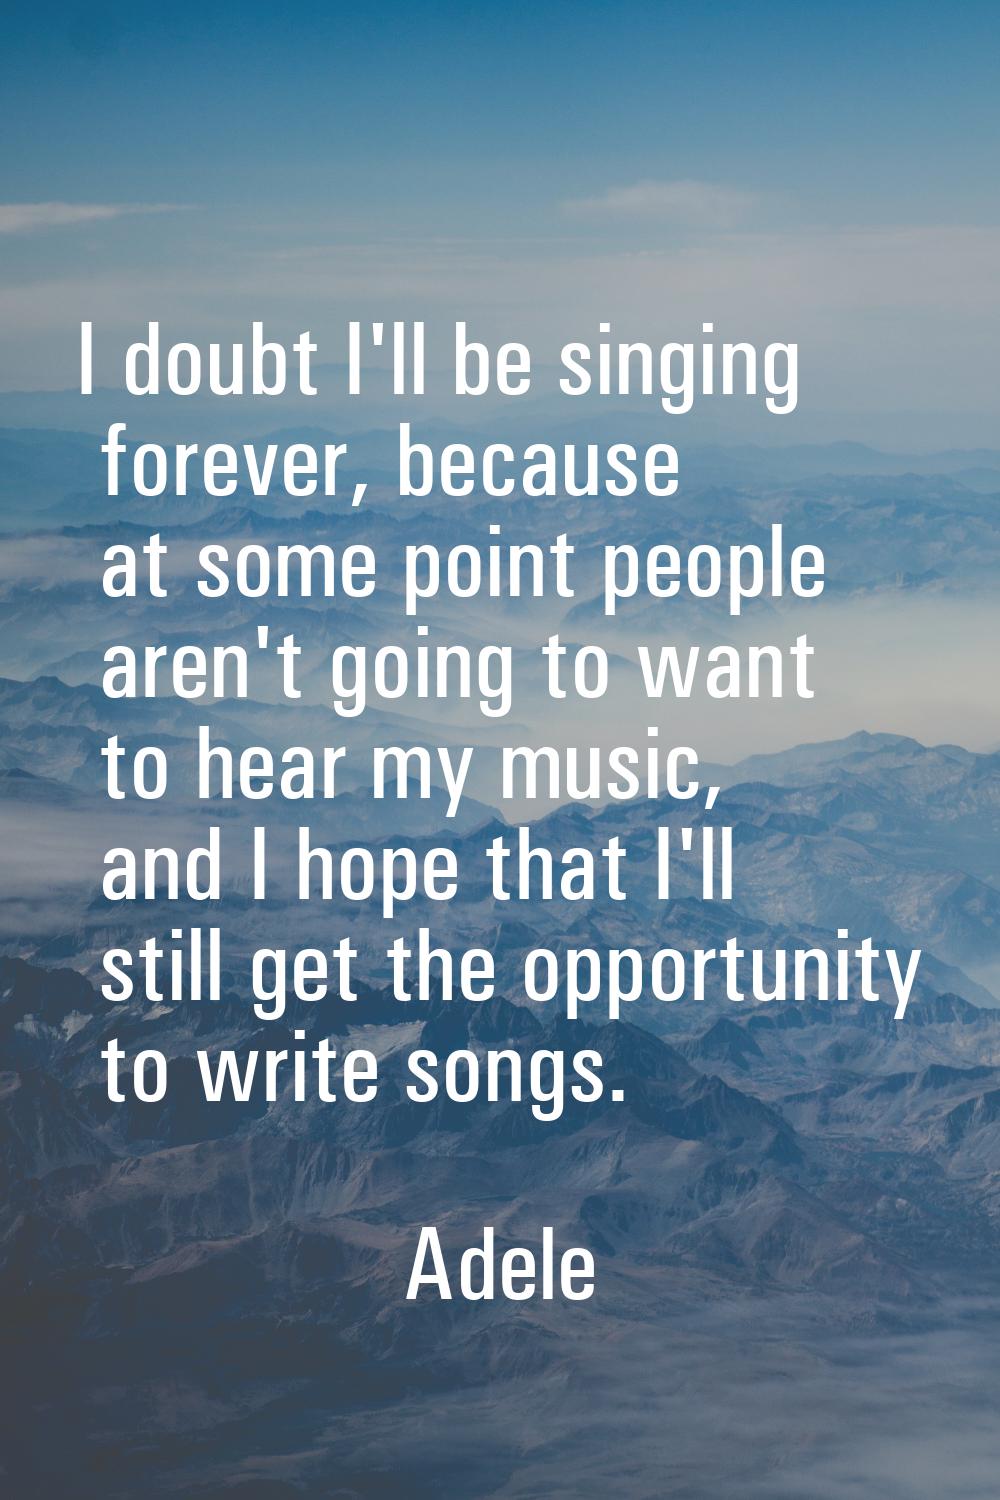 I doubt I'll be singing forever, because at some point people aren't going to want to hear my music